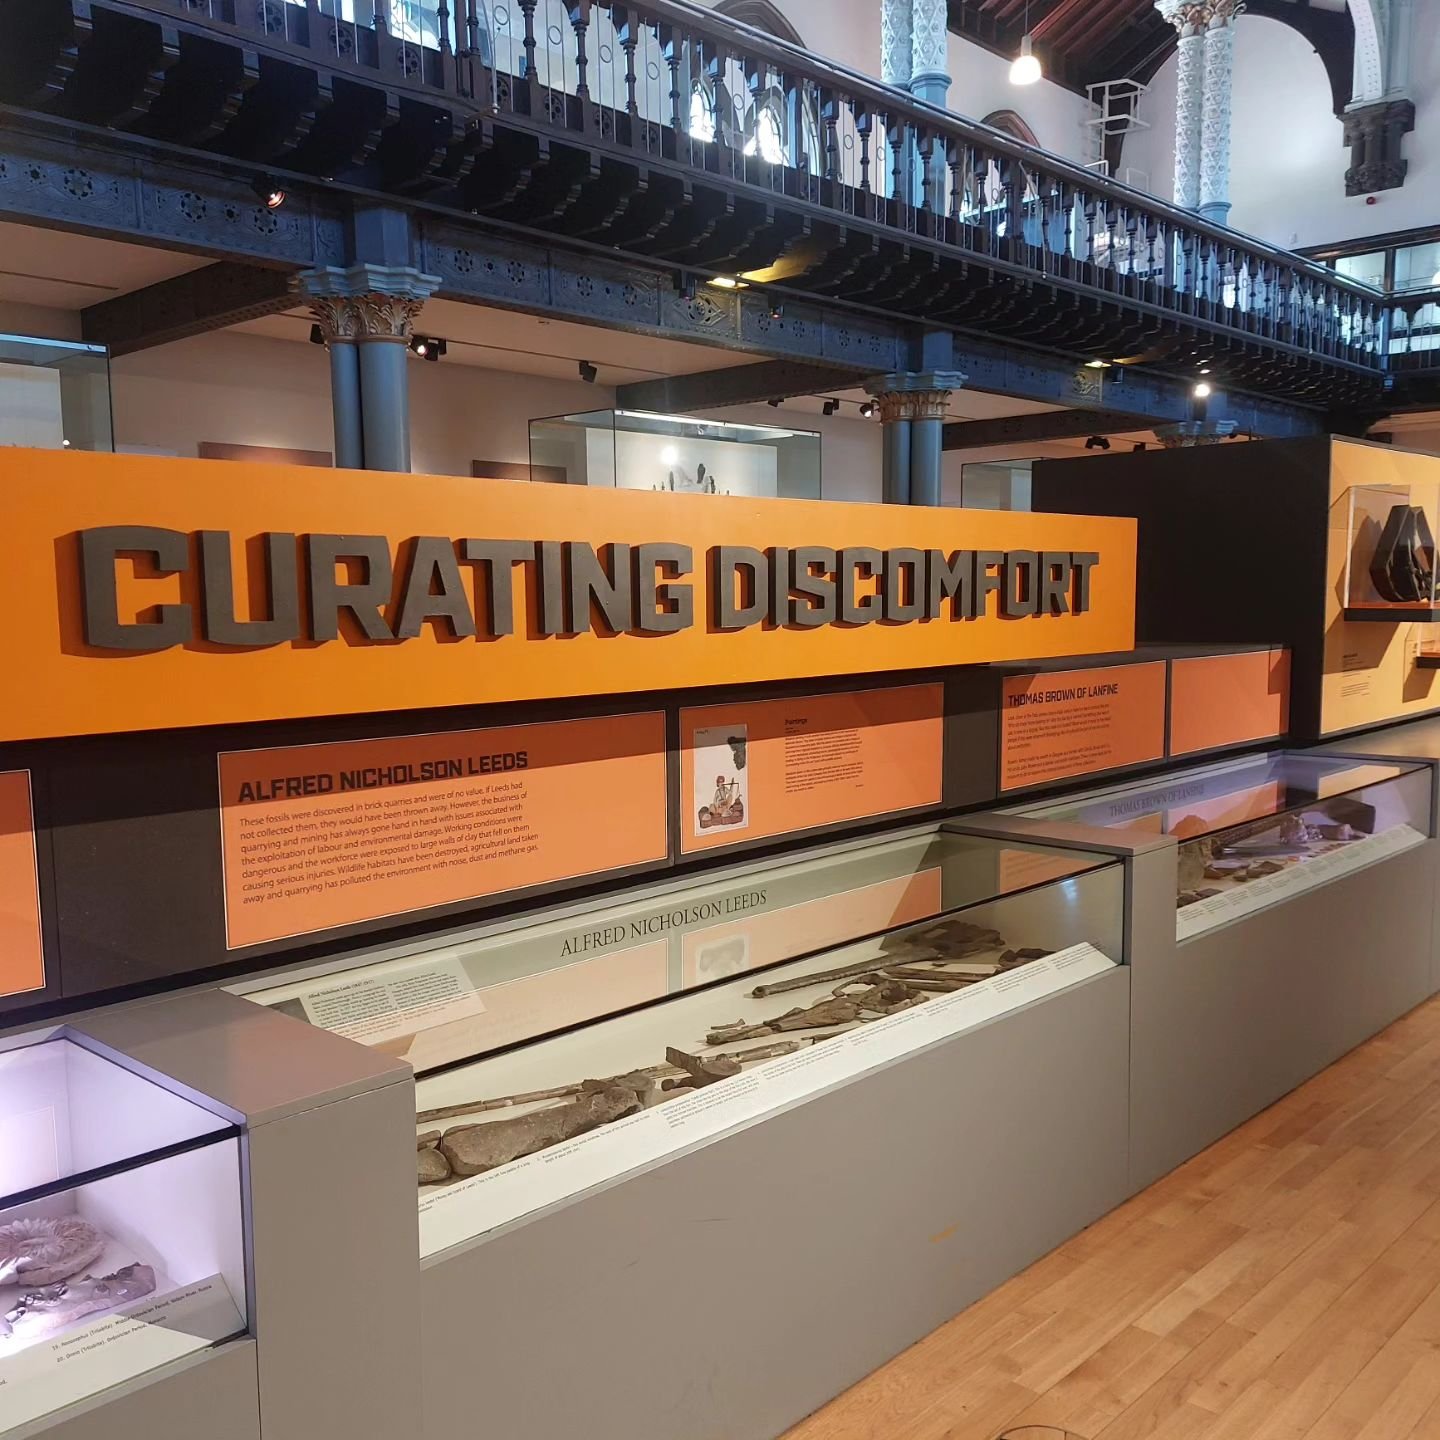 &quot;The exhibition 'Curating Discomfort&rsquo; at the Hunterian Museum puts forward discomforting provocations and interventions to help us to understand that museums have perpetuated ideologies of white supremacy: a political, economic and cultura